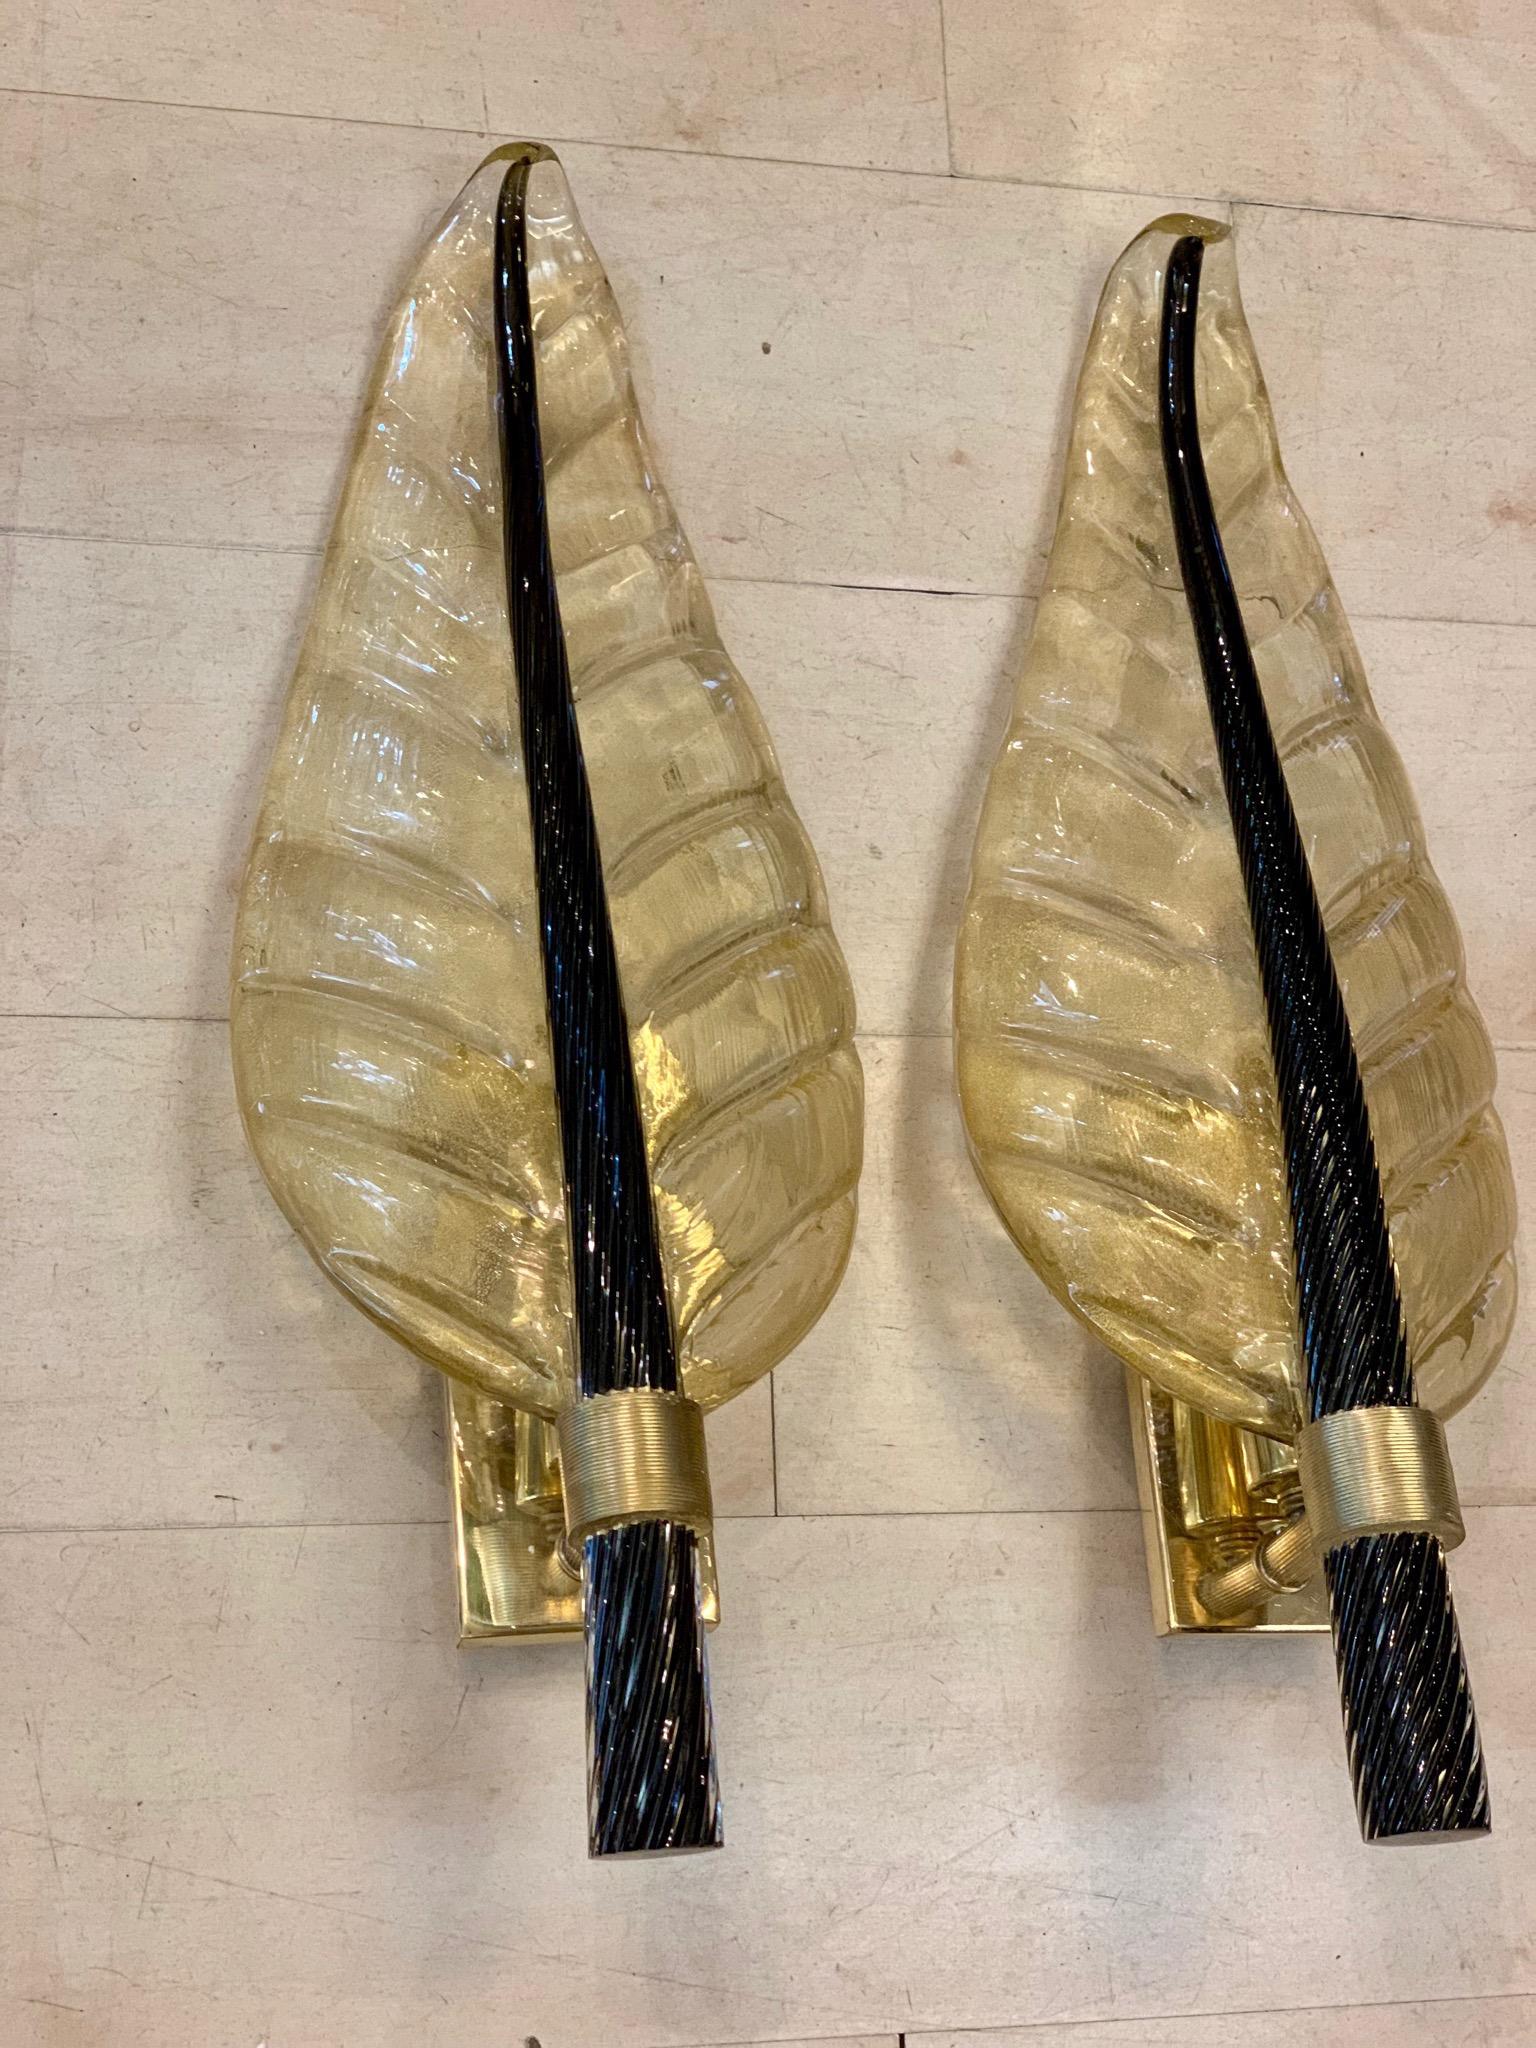 Pair of Murano glass gold leaf sconces with black torchon glass leaf stem, brass structure, one bulb for lamp.
These sconces are in Murano hand blown thick glass with gold flecks, the stem of the leaf is in full black torchon Murano glass.